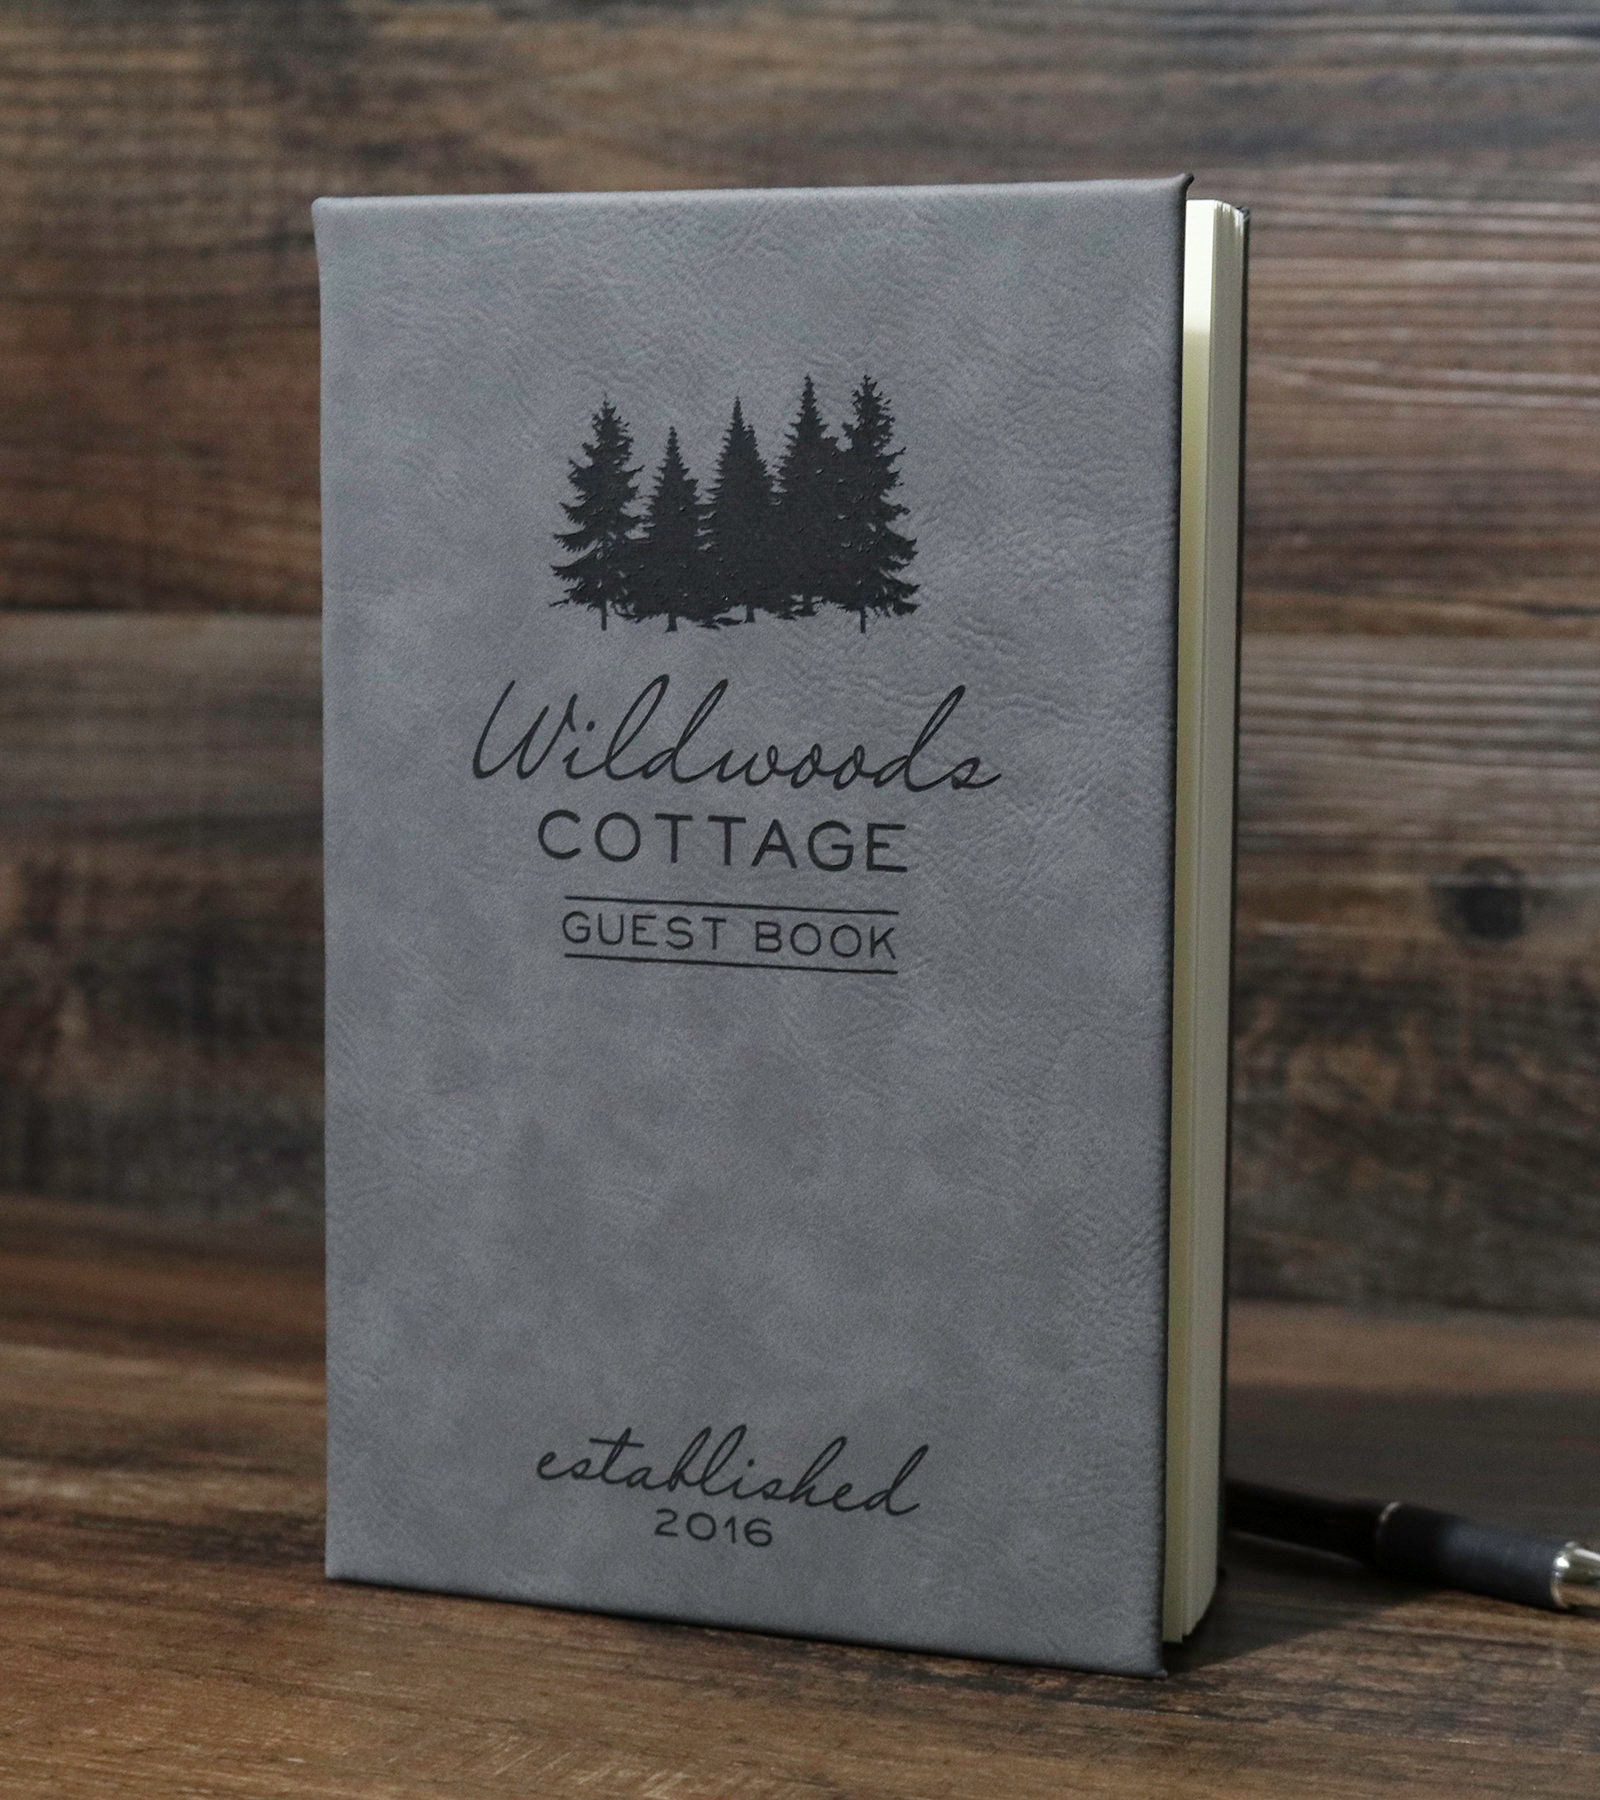 great idea for a guest book for the cottage